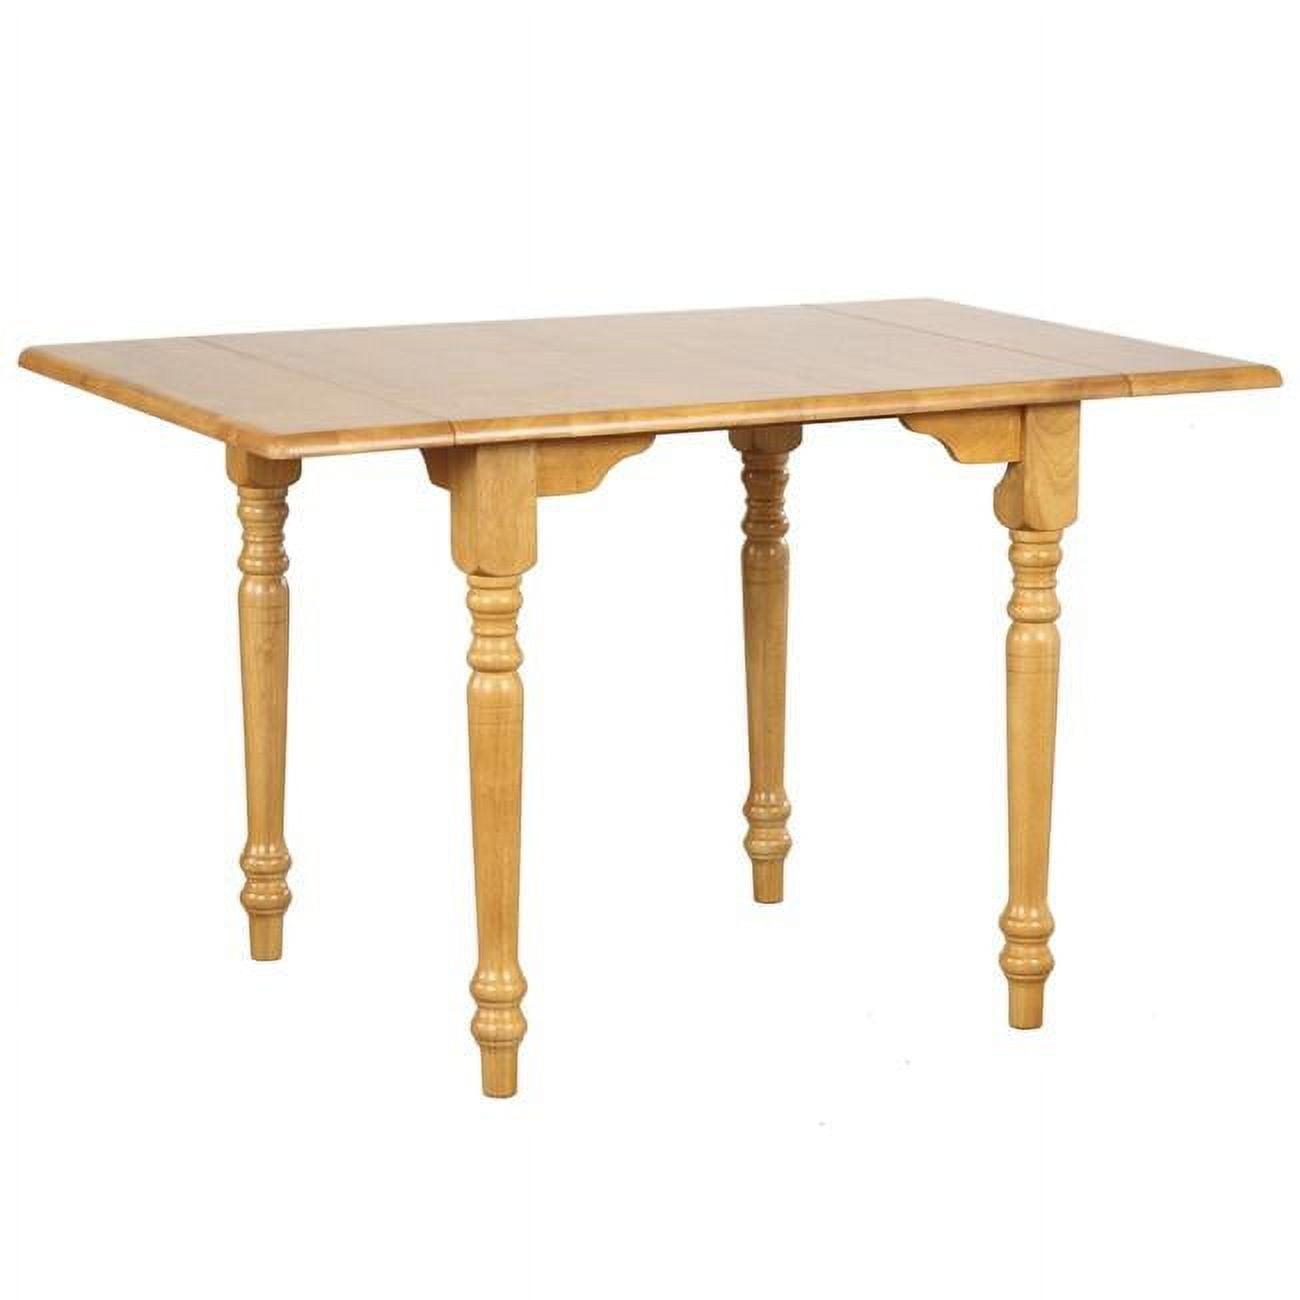 Countryside Charm Light Oak Extendable Drop Leaf Dining Table